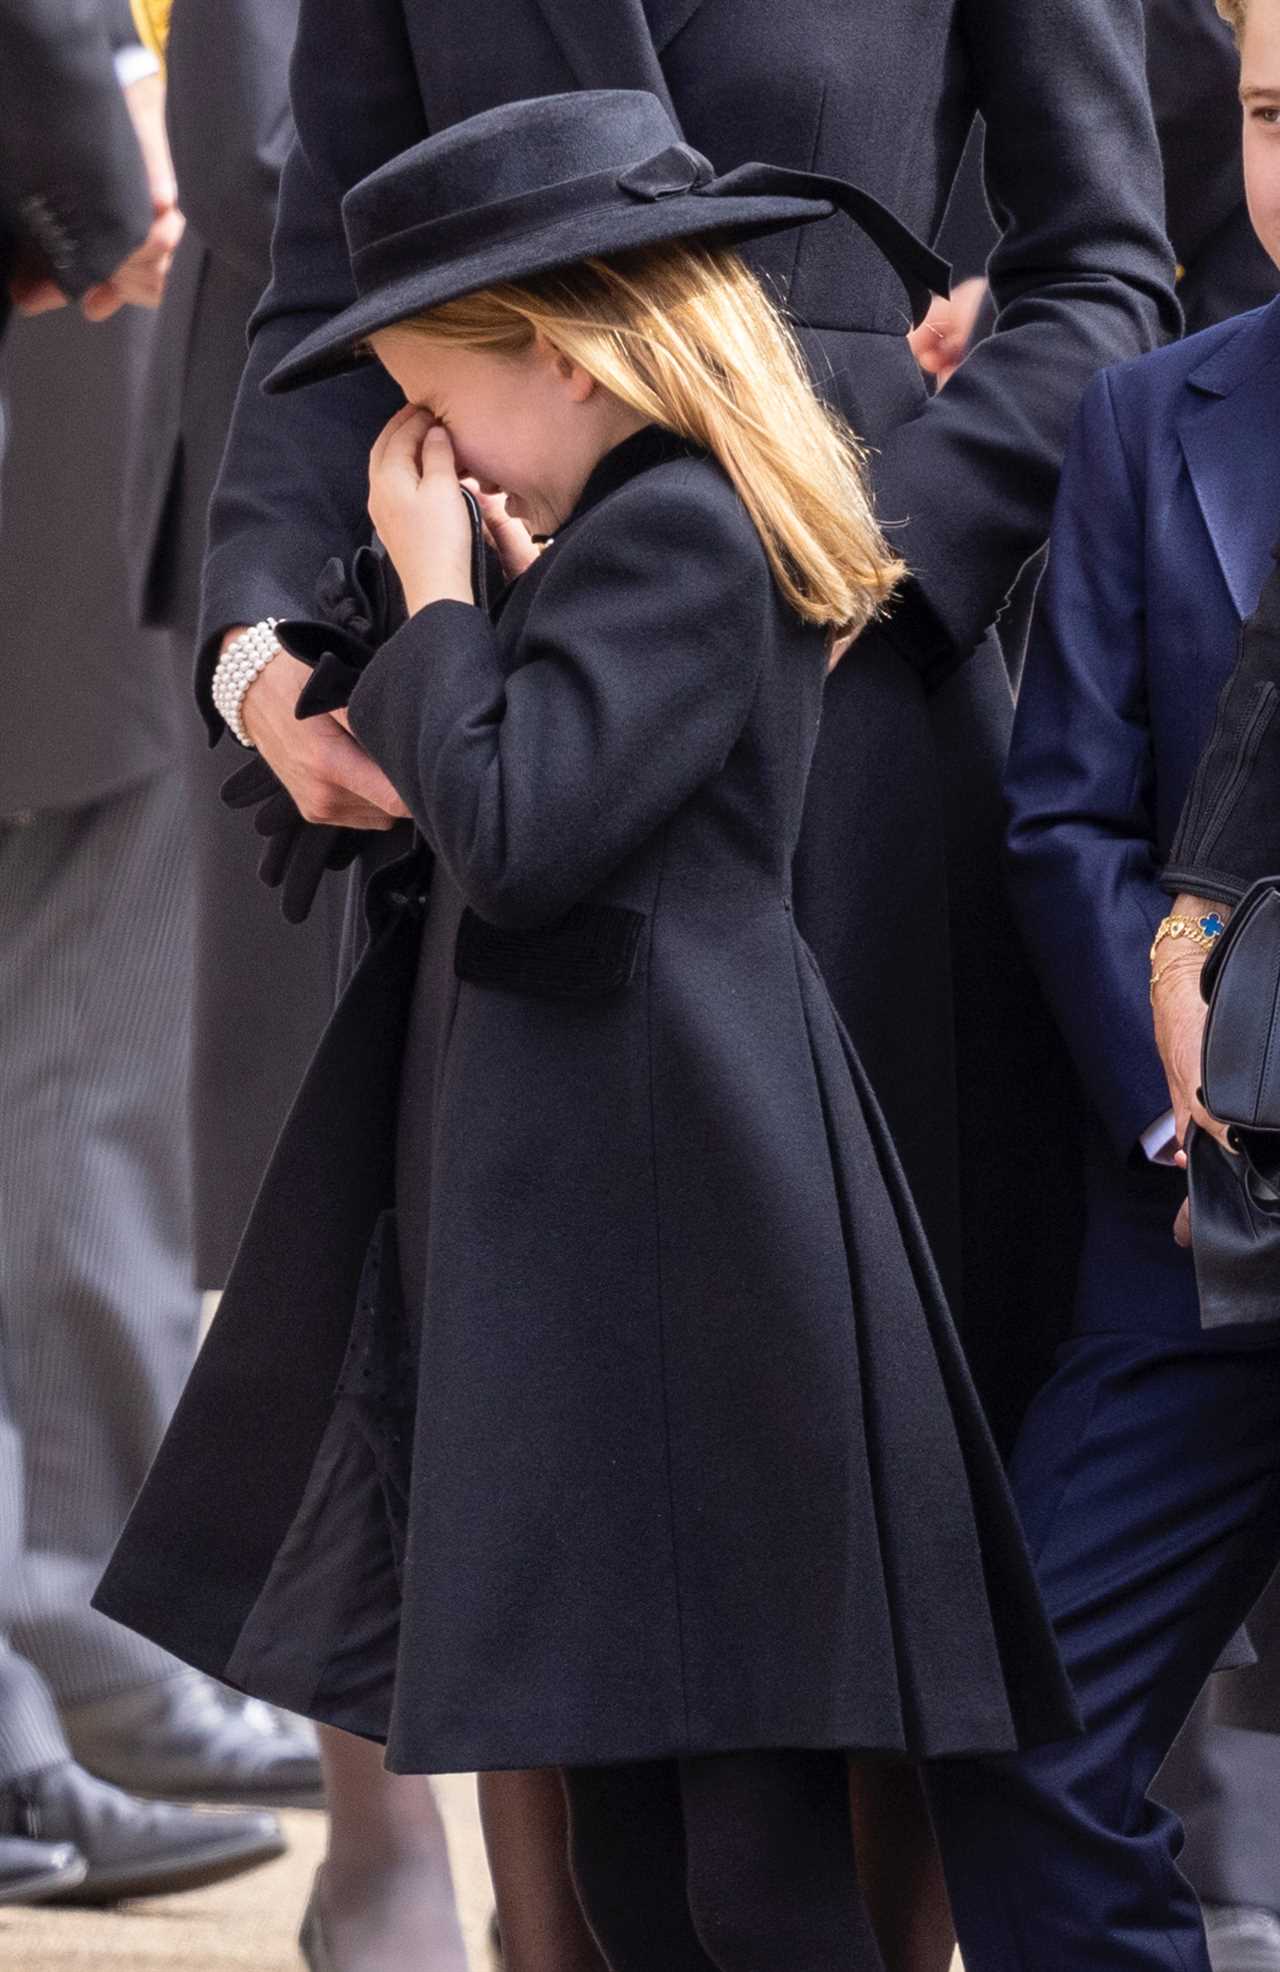 Heartbreaking moment Princess Charlotte, 7, cries after Queen’s funeral – leaving royal fans devastated